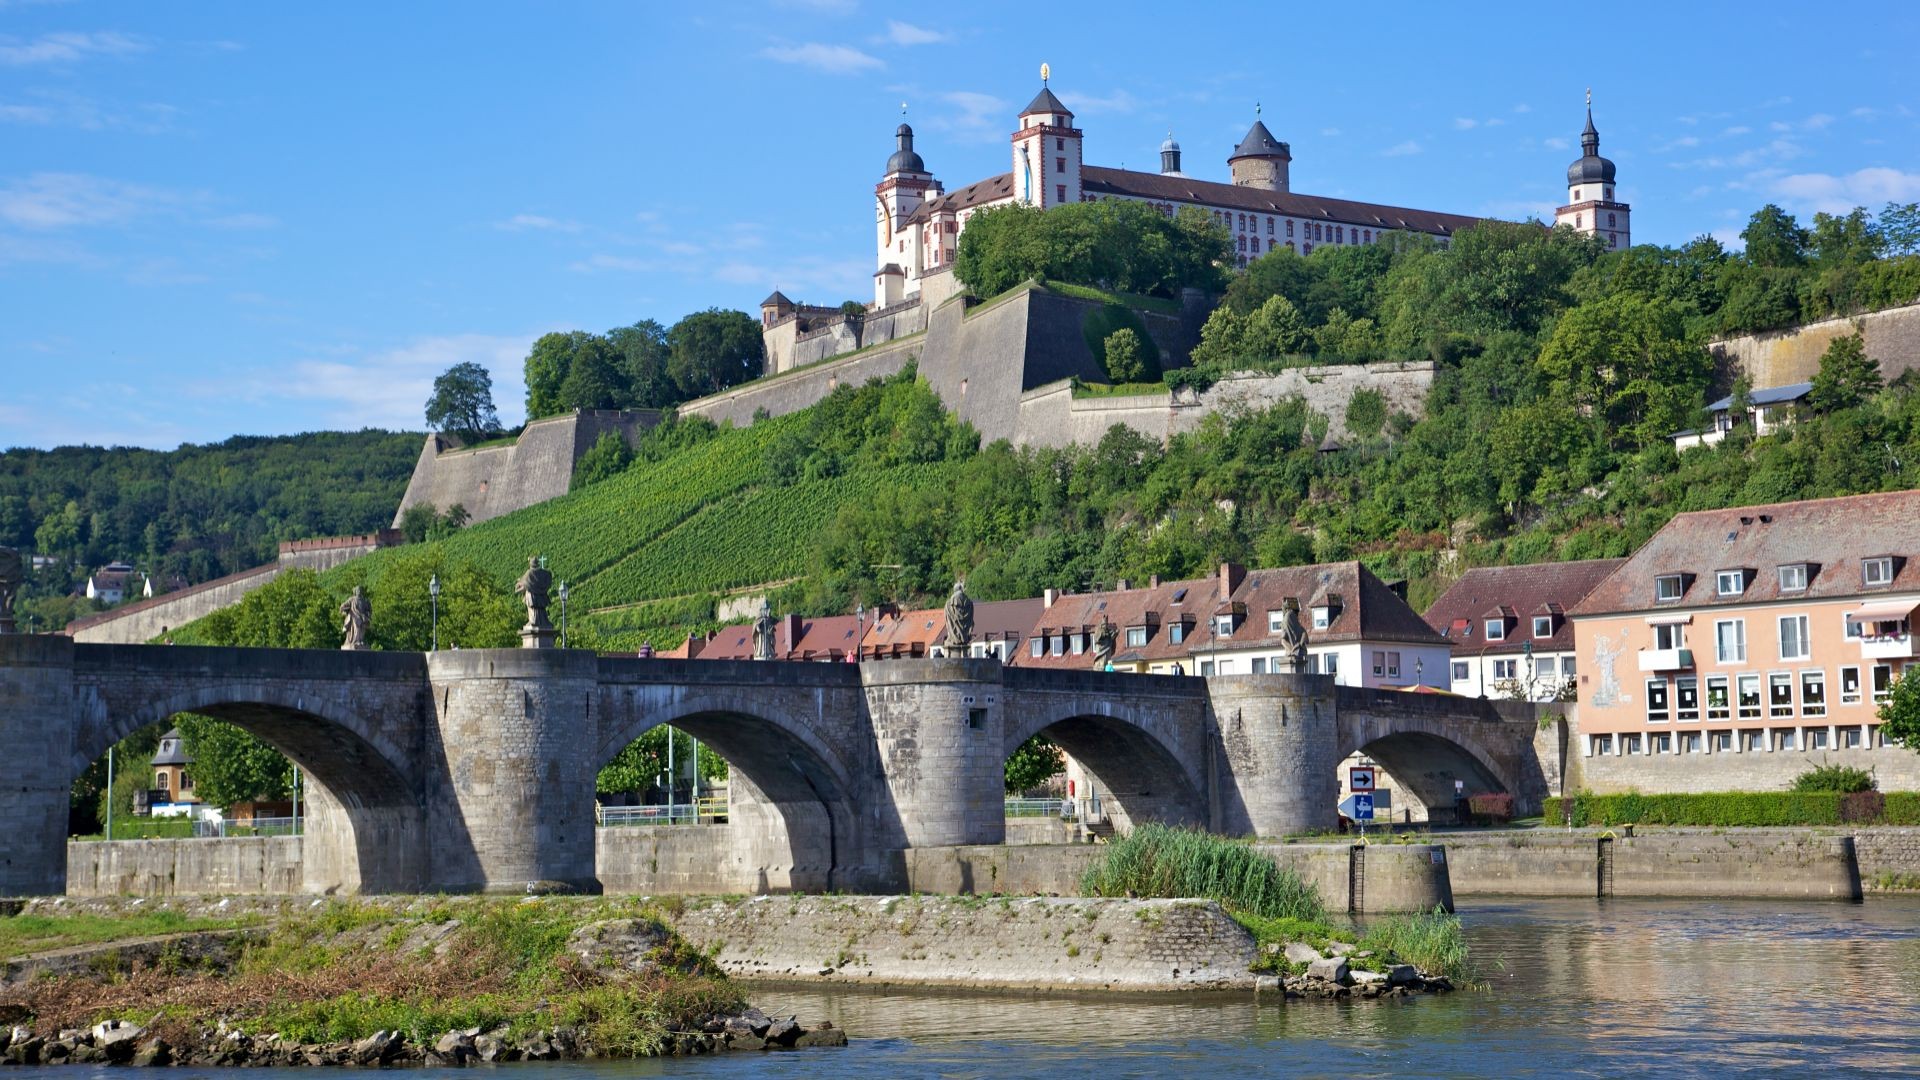 General 1920x1080 architecture castle trees Germany town old building bridge arch tower river hills fortress